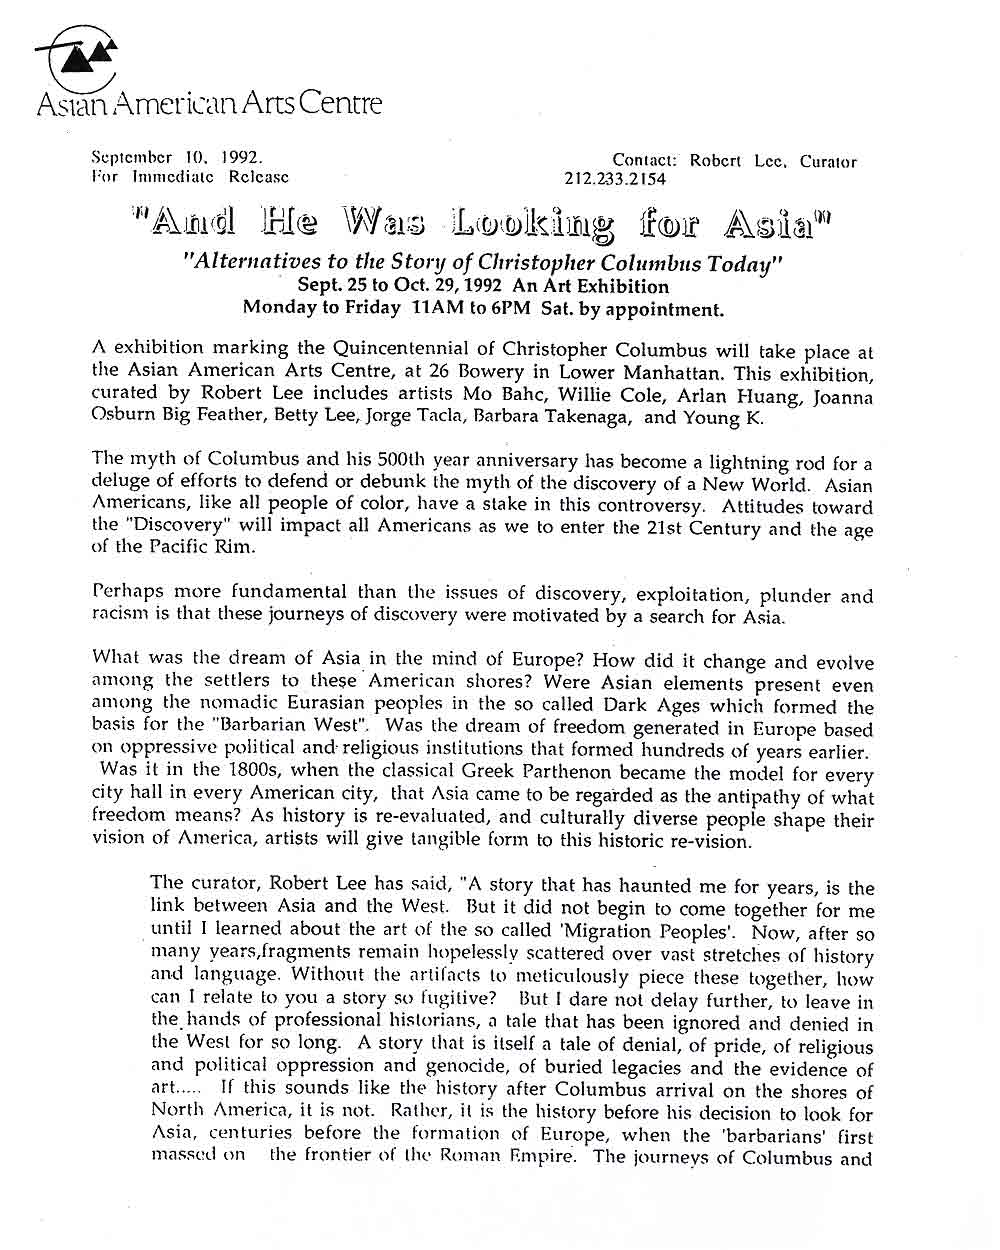 And He Was Looking For Asia, postcard, press release, pg 1